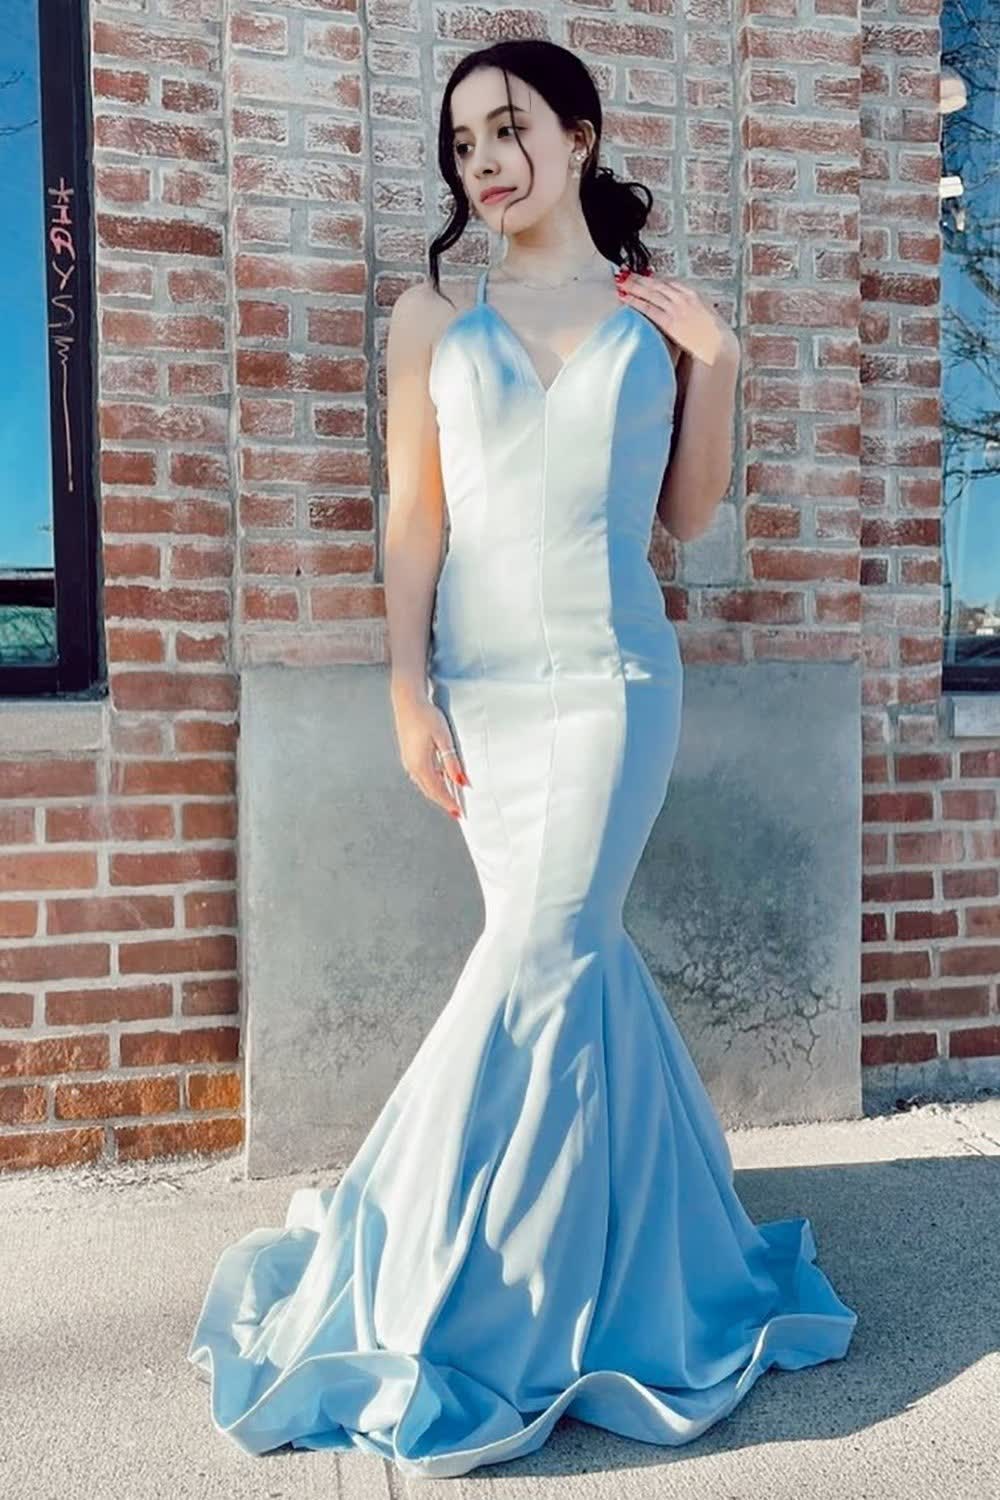 Mermaid Spaghetti Straps Light Blue Long Corset Prom Dress with Open Back outfit, Mermaid Spaghetti Straps Light Blue Long Prom Dress with Open Back